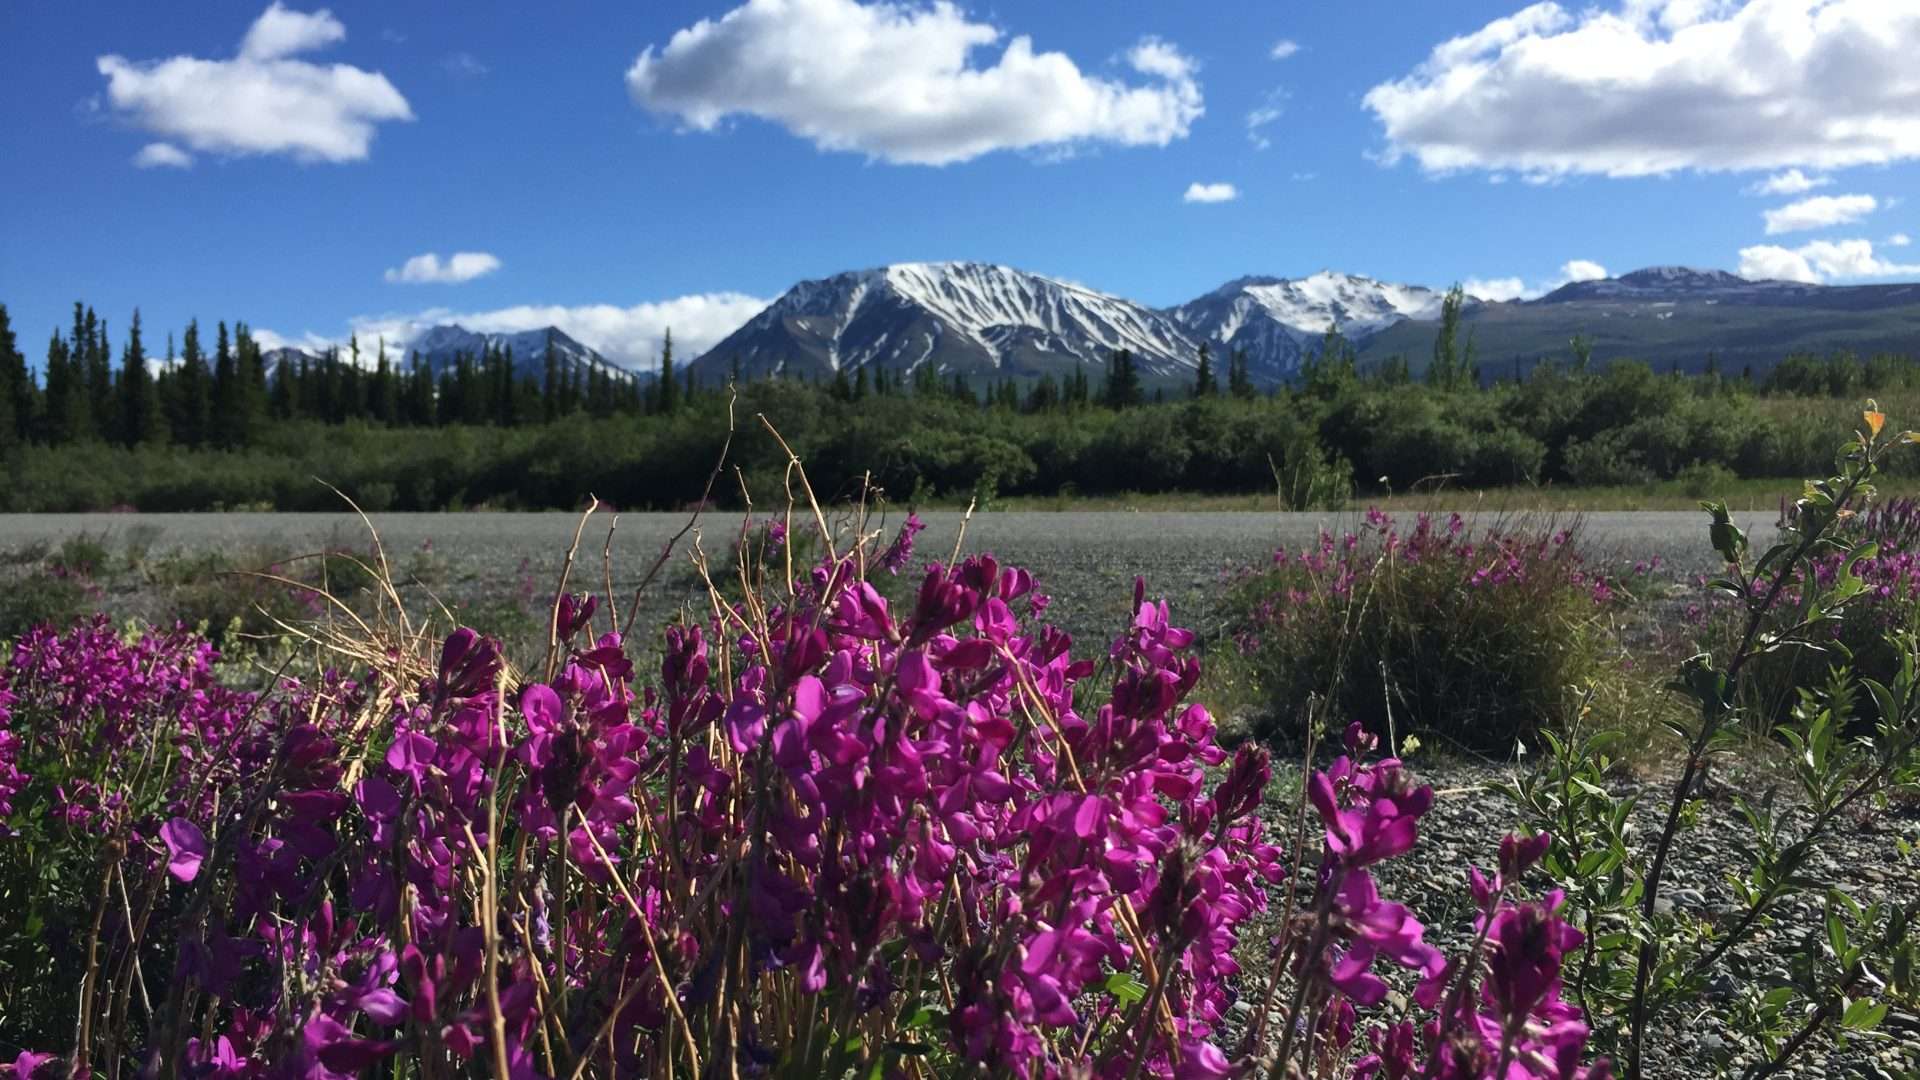 Kluane mountains and fireweed